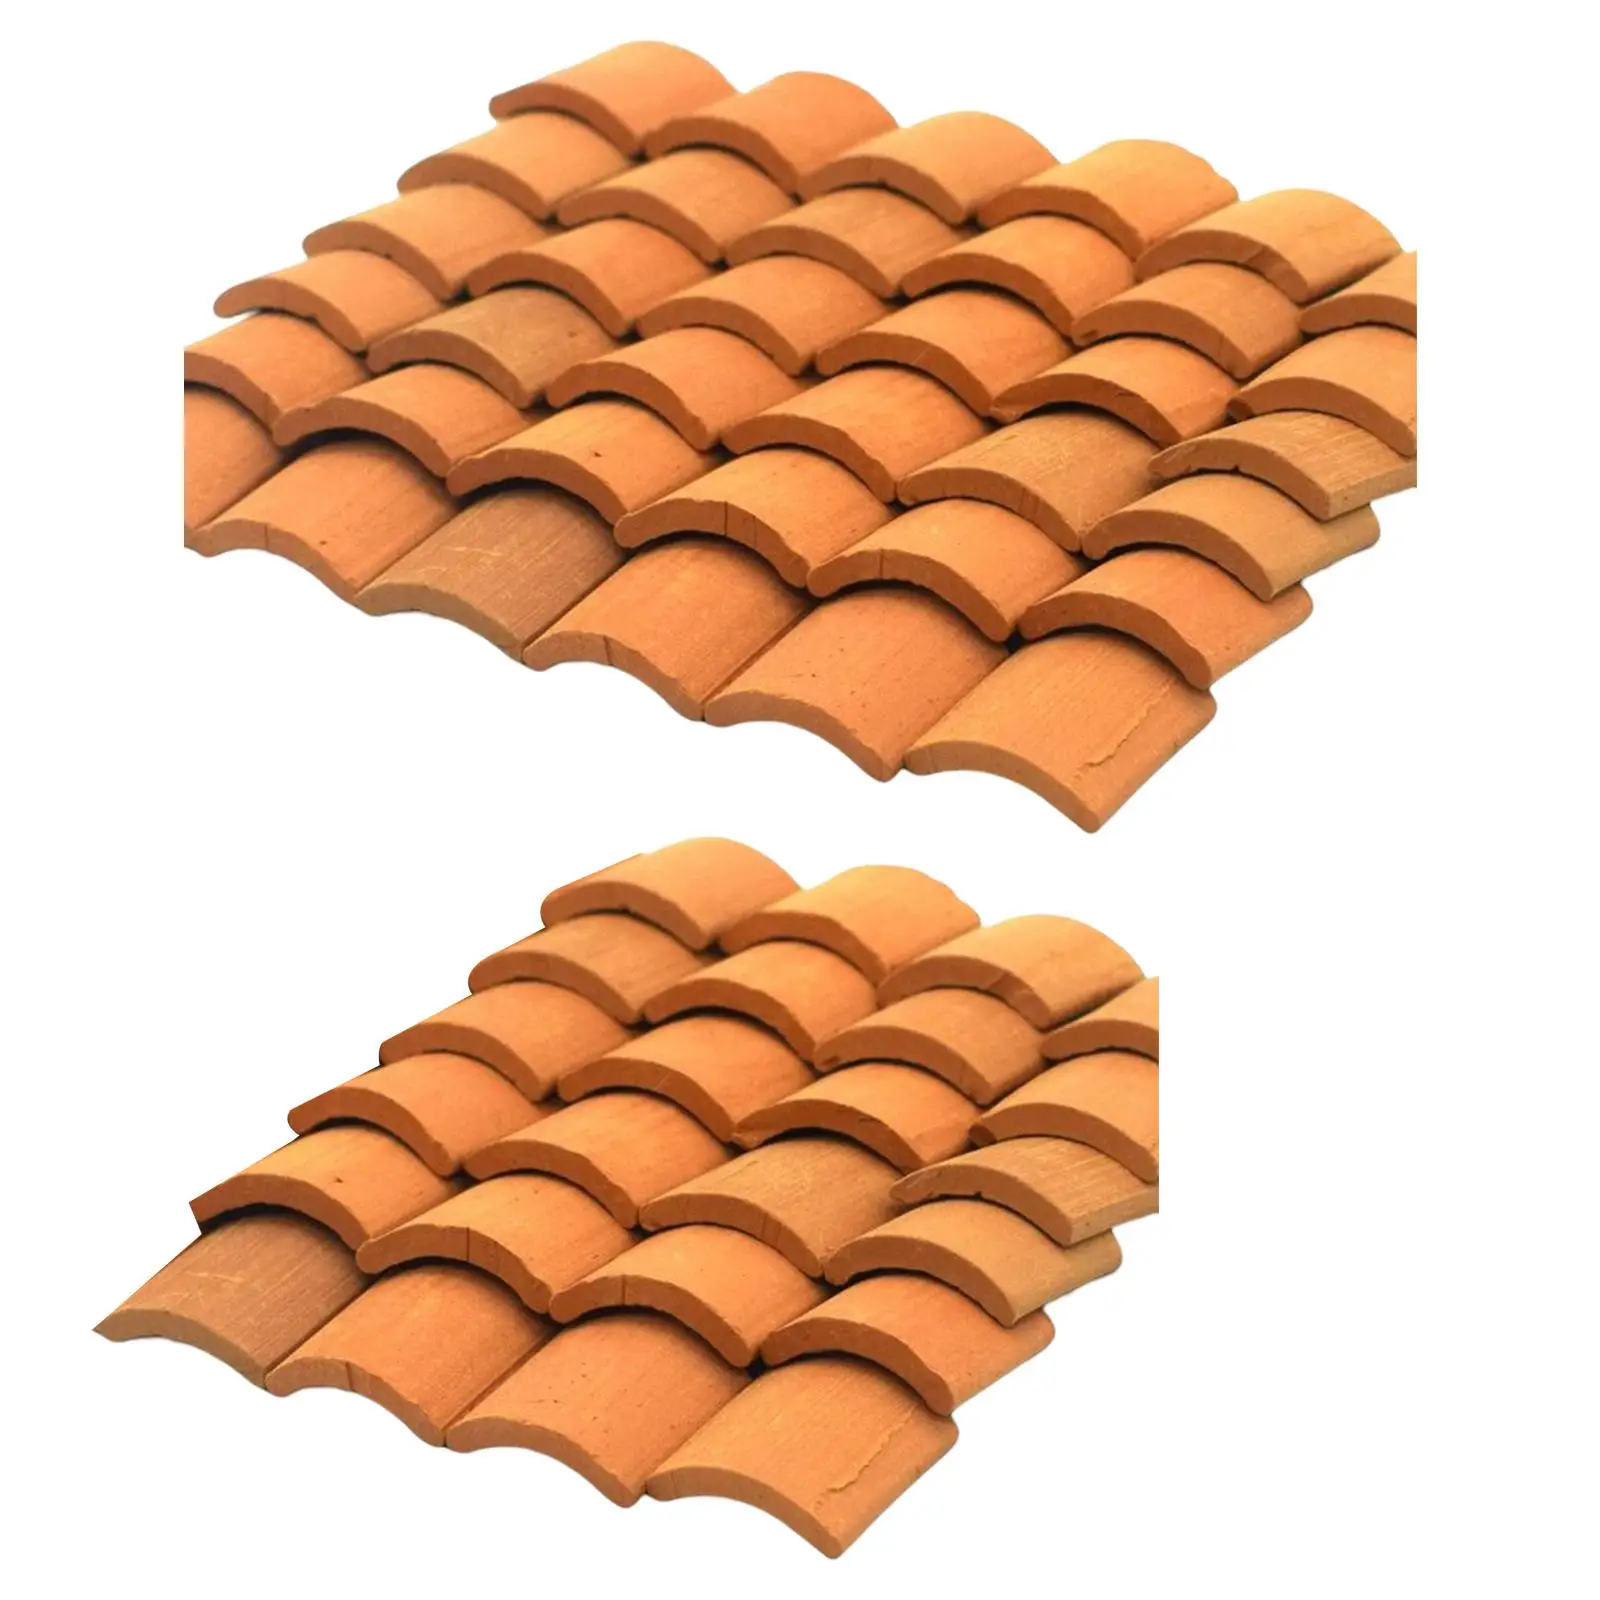 Set of 60 red Wall Bricks 1:1 Miniature Tiles Figurine Landscaping Accessories for Dollhouses Toys DIY Accessory